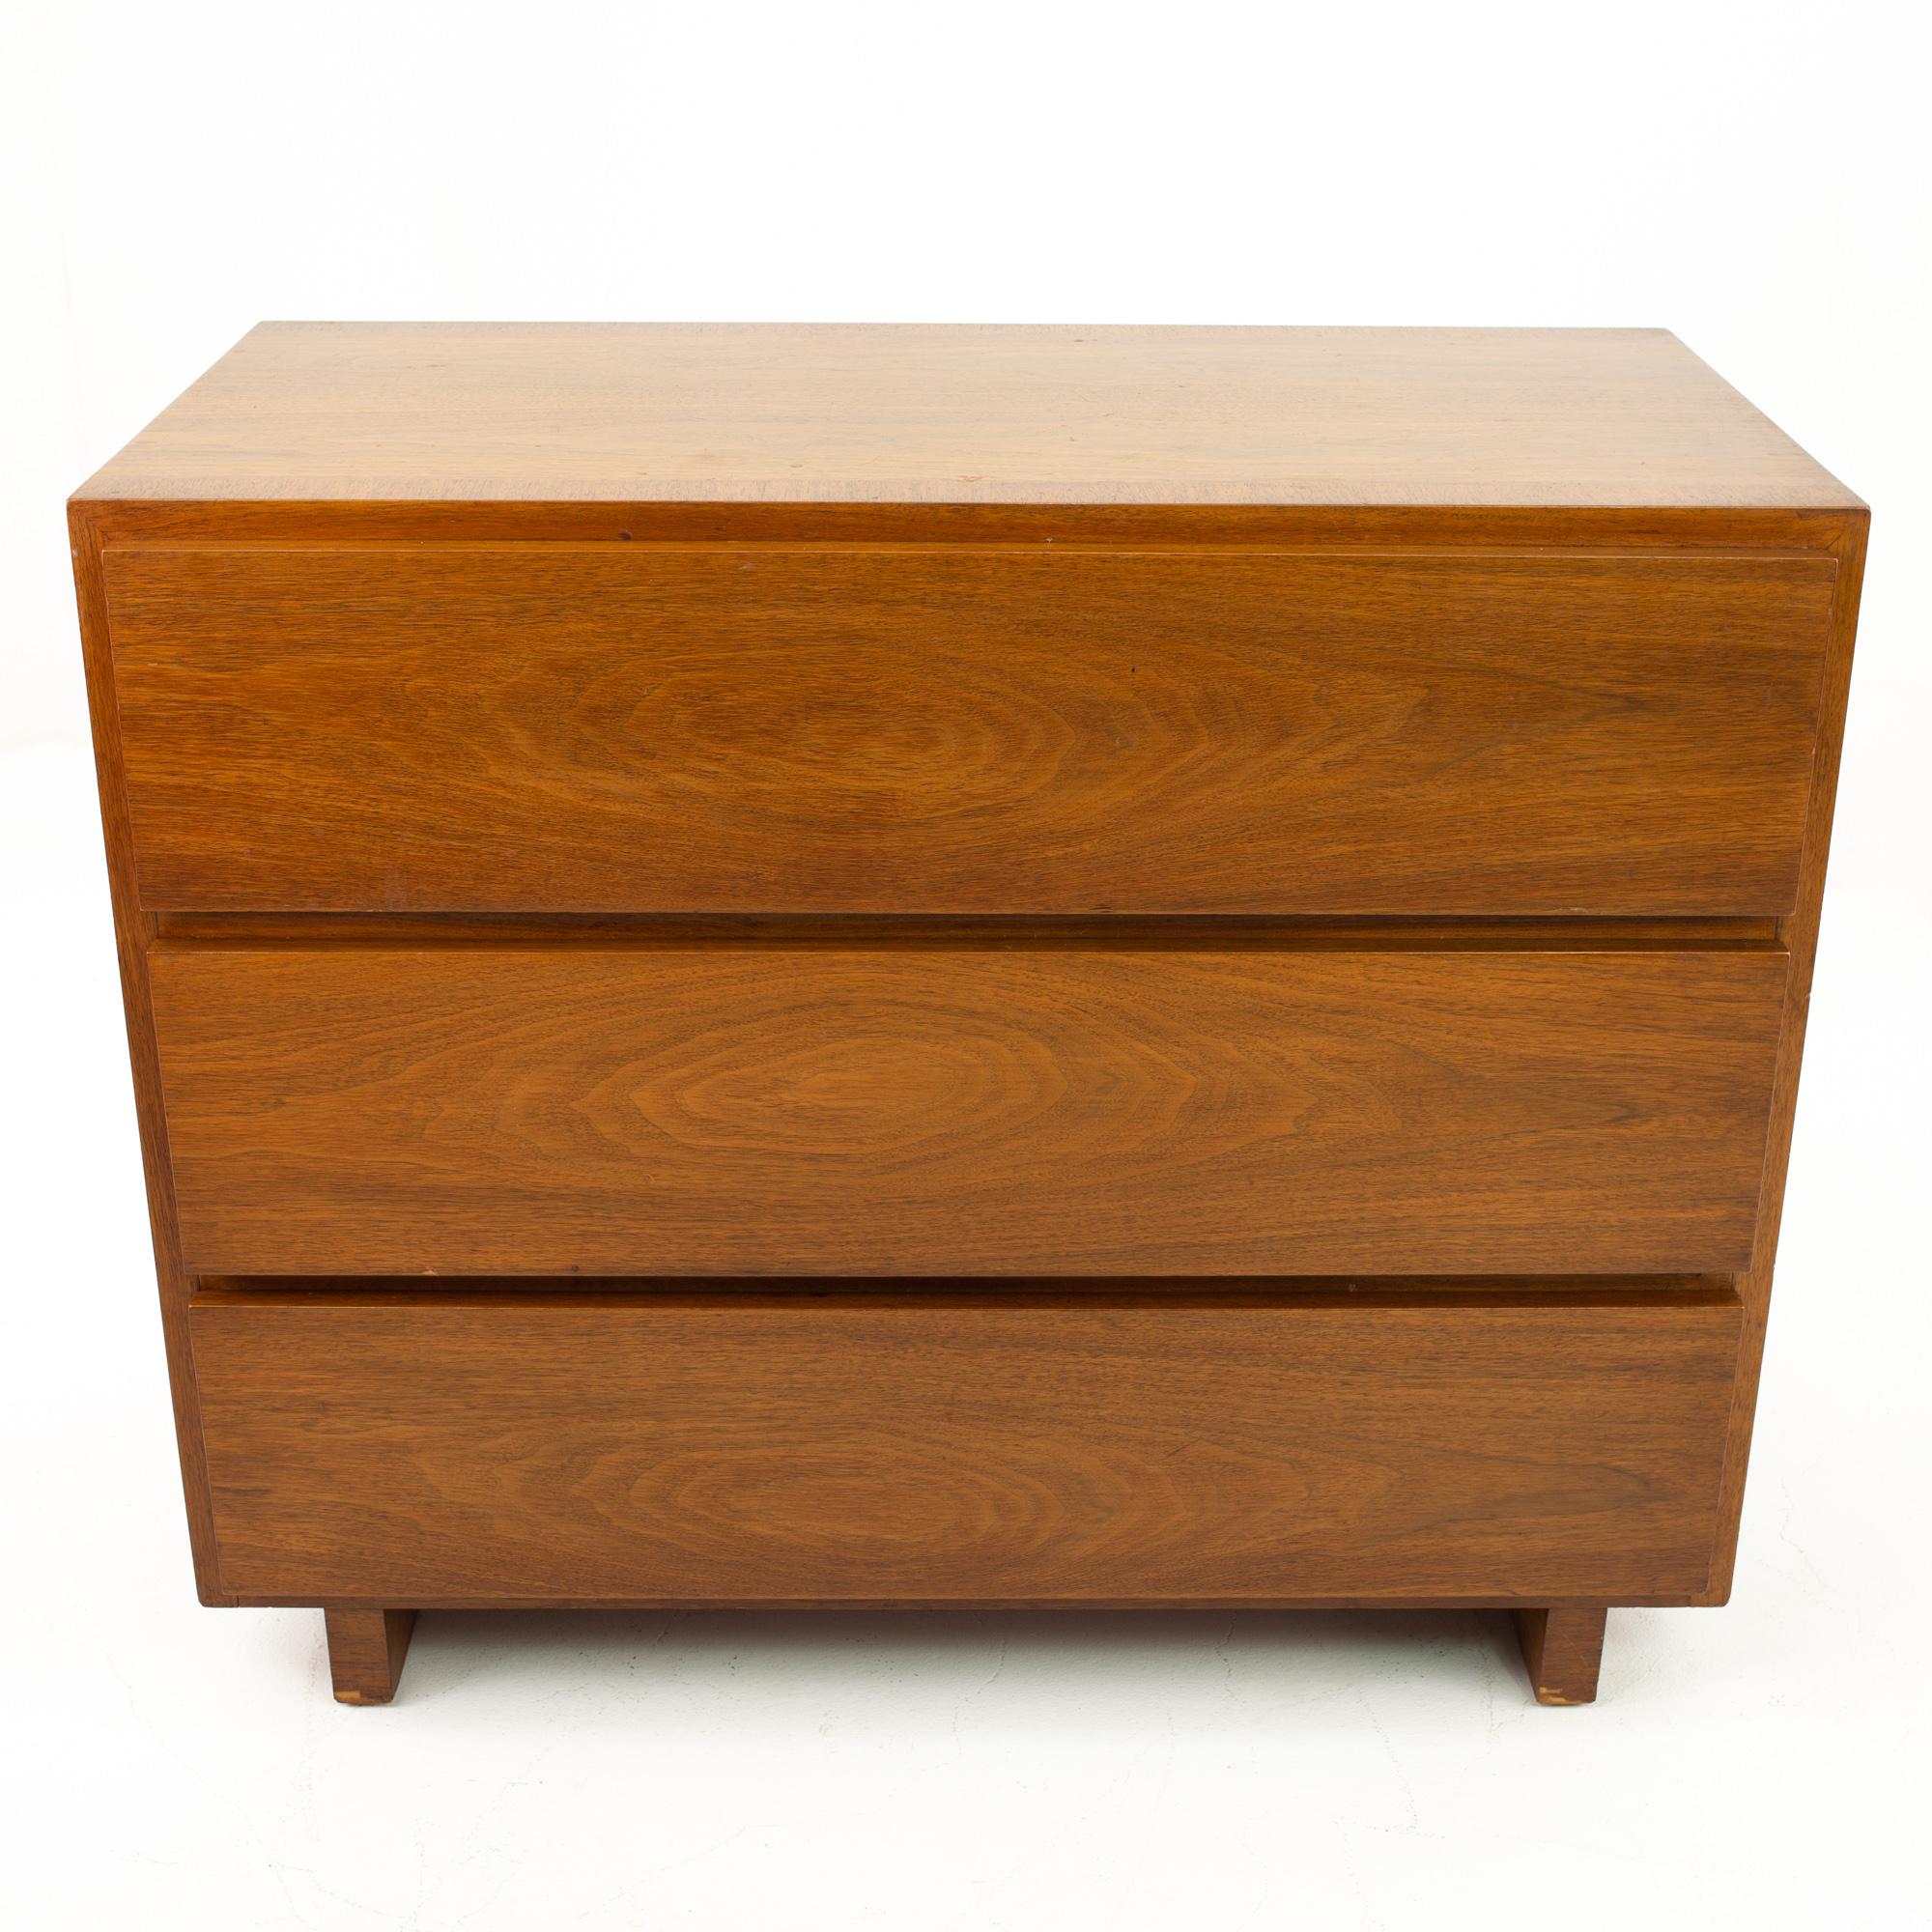 Widdicomb Mid Century 3 drawer dresser chest
Dresser measures: 38 wide x 20 deep x 31 high

All pieces of furniture can be had in what we call restored vintage condition. This means the piece is restored upon purchase so it’s free of watermarks,